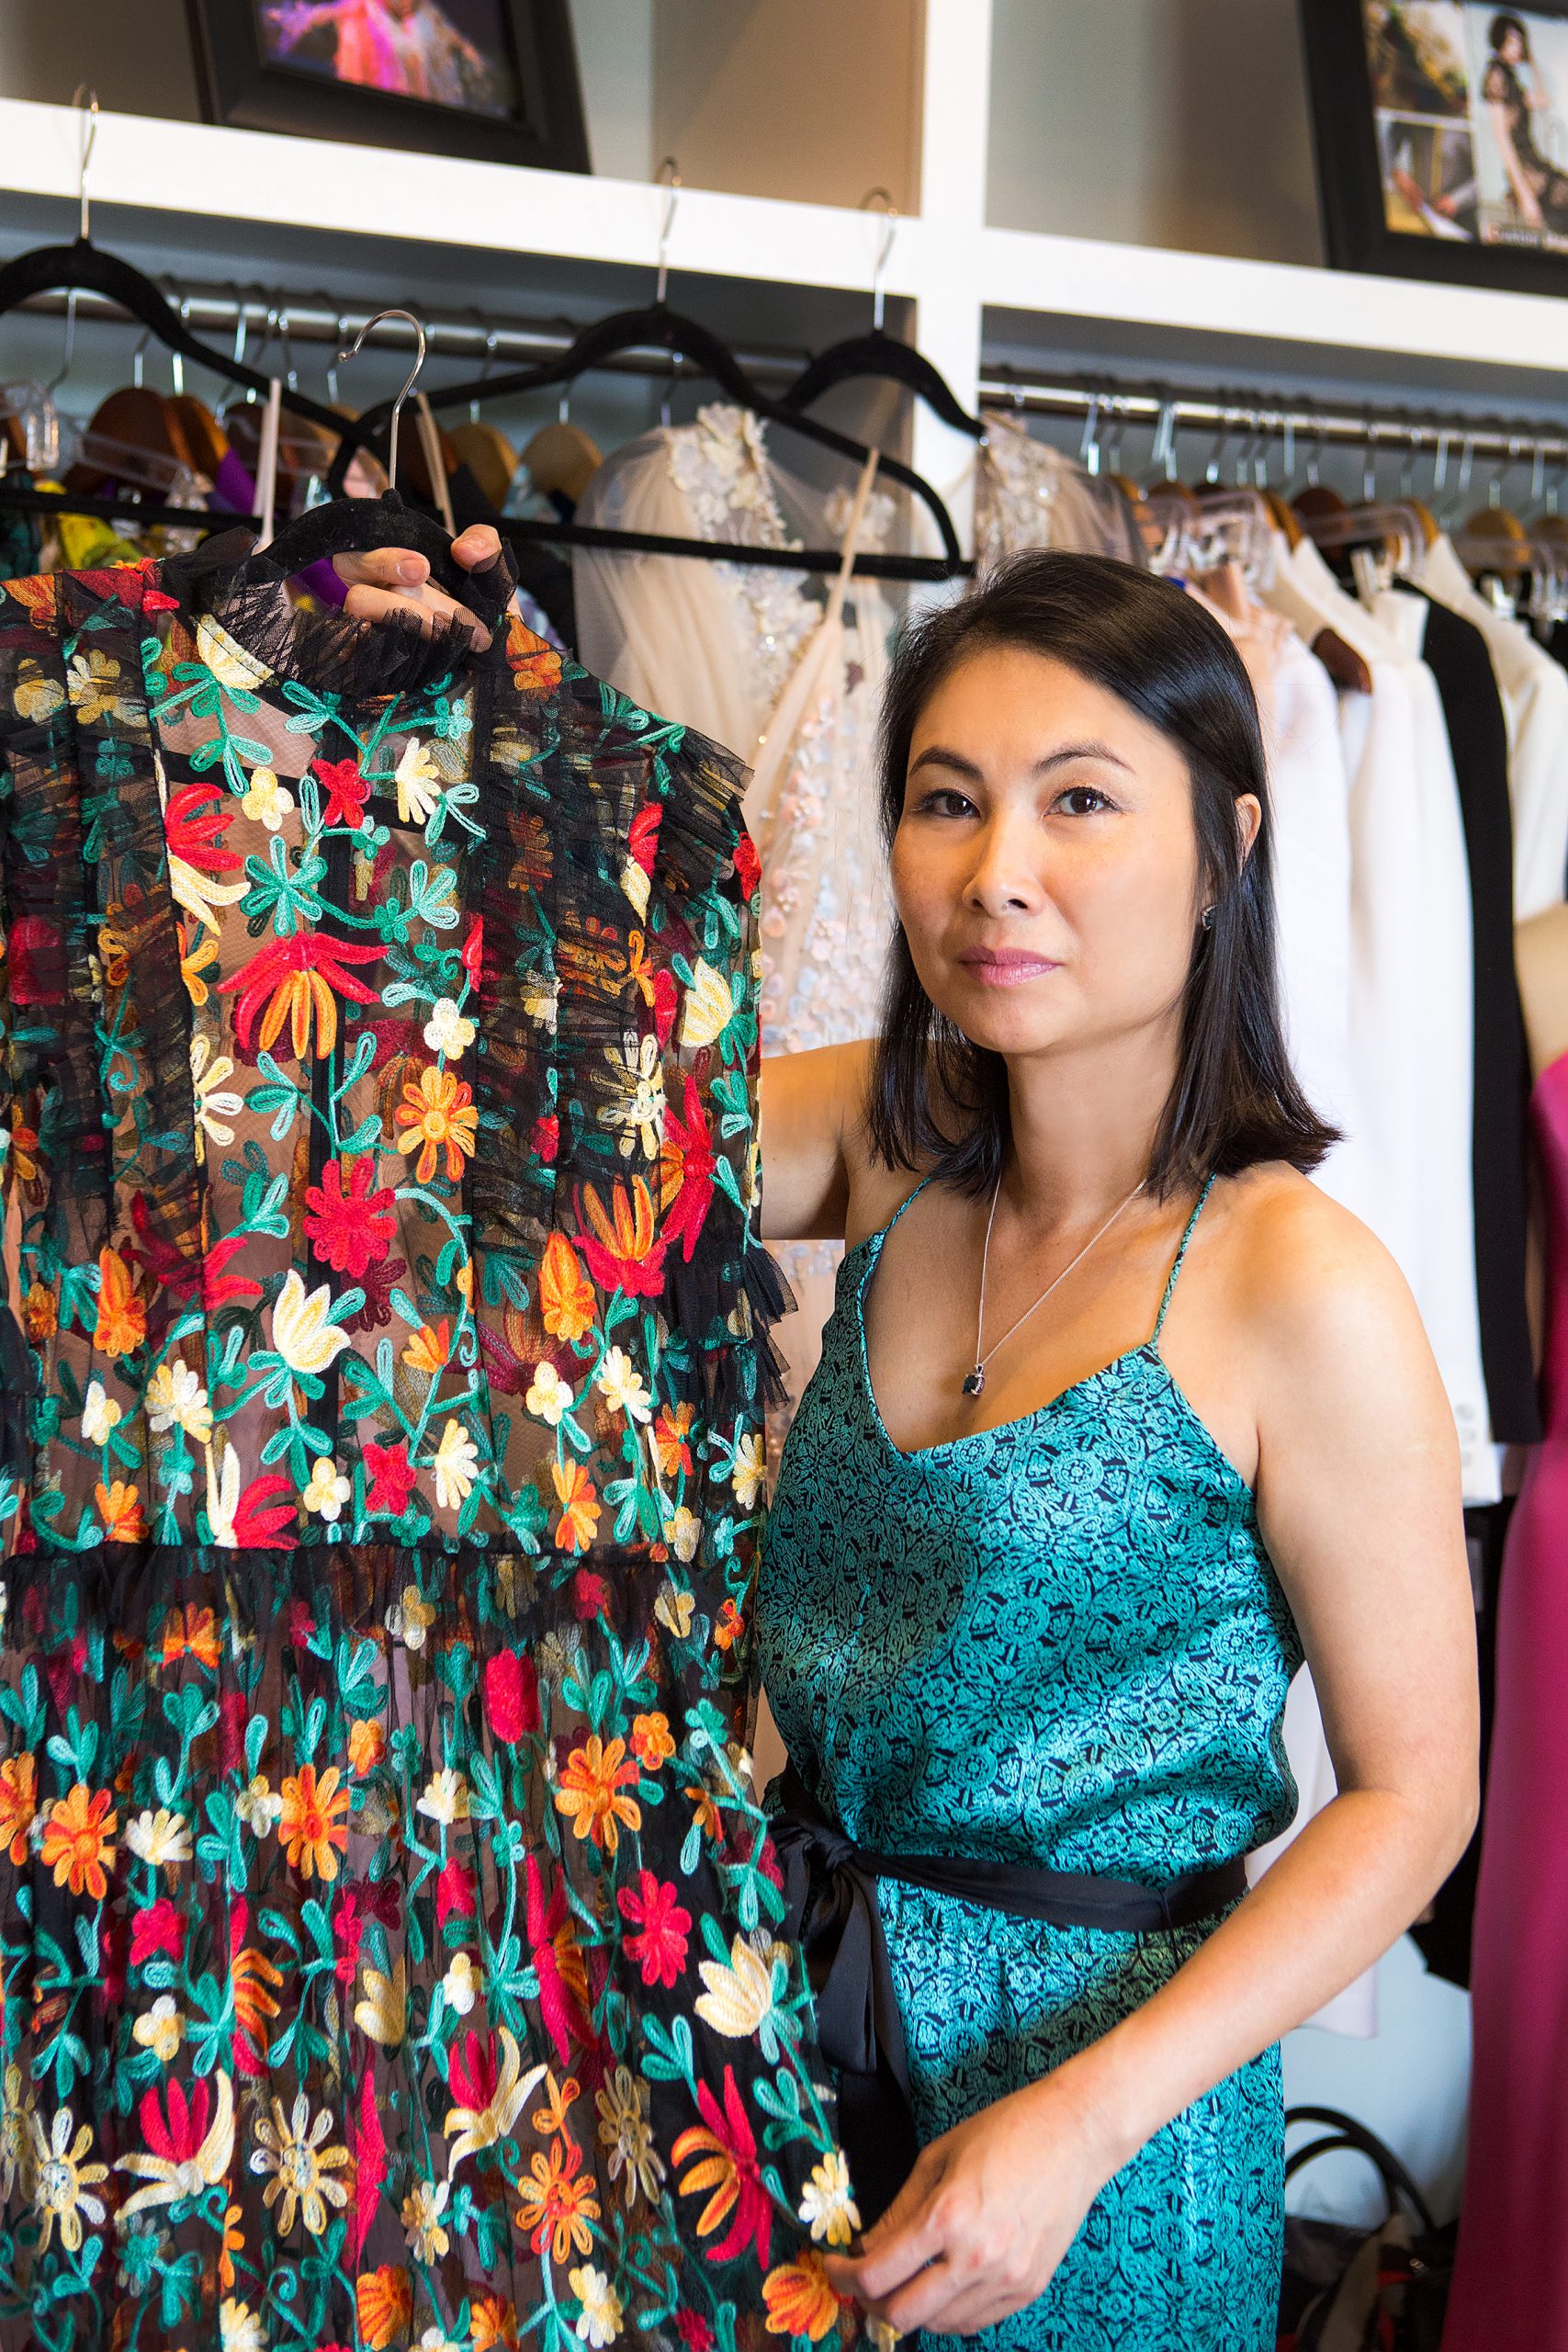 Minh’s dream of becoming a professional designer with models wearing her fashions on New York runways came true in 2017. She admits the experience of watching models walk down the runway in clothing she had sewn in Lexington was surreal. “My career took off after that show.” 